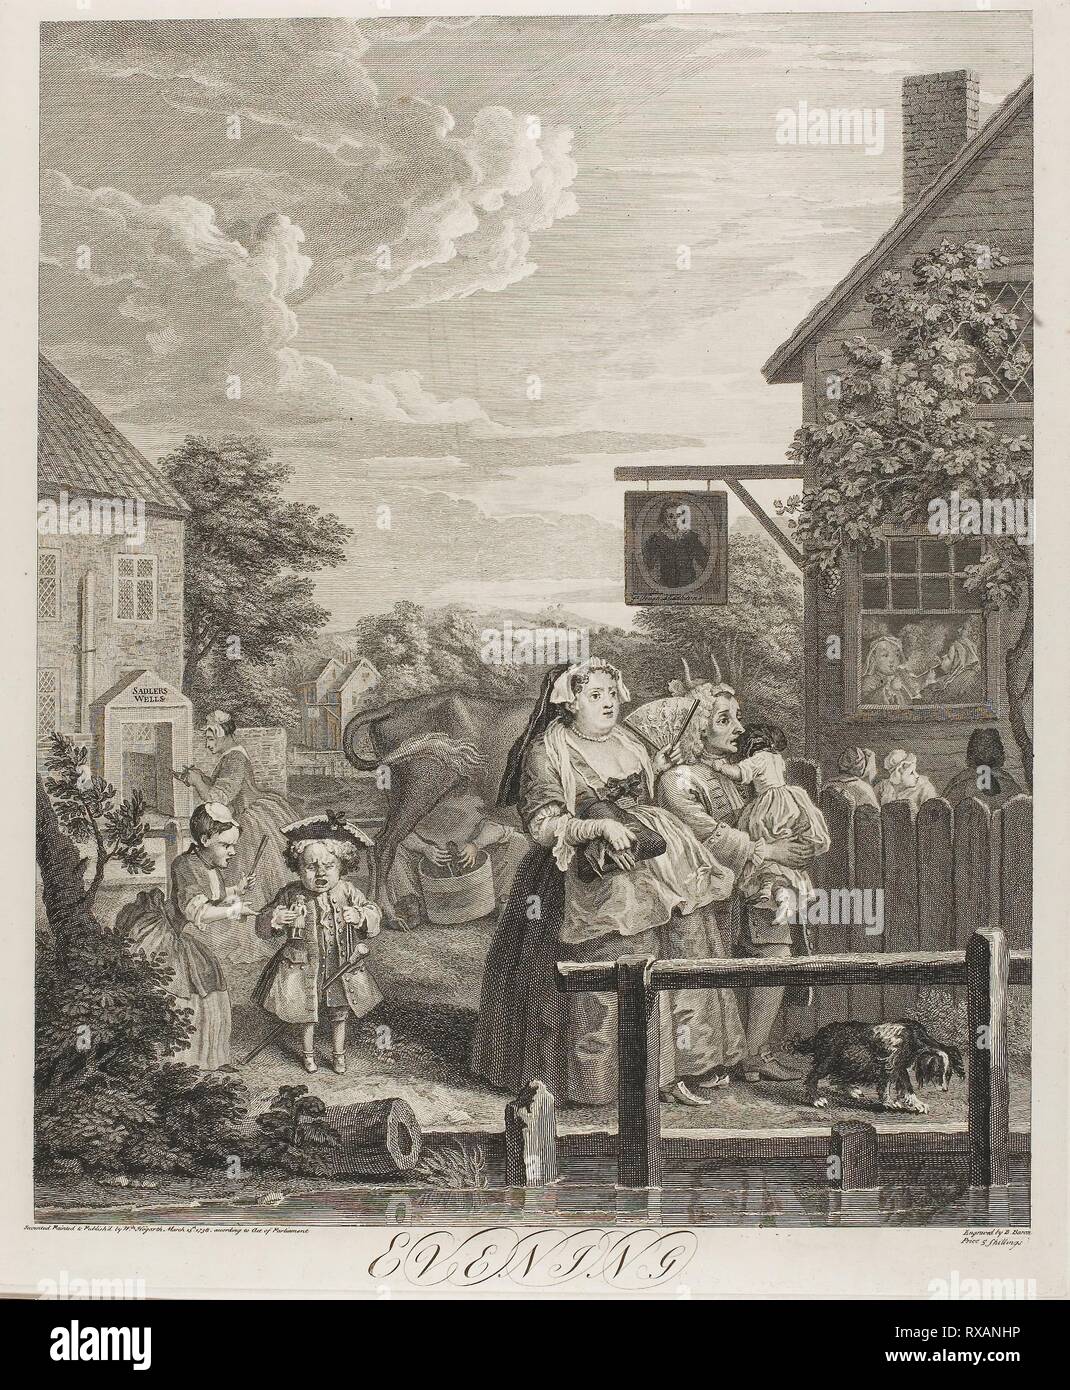 Evening, plate three from The Four Times of the Day. Bernard Baron (French, 1696-1762); after William Hogarth (English, 1697-1764). Date: 1738. Dimensions: 453 × 374 mm (image); 485 × 405 mm (plate); 665 × 500 mm (sheet). Etching and engraving in black on ivory laid paper. Origin: France. Museum: The Chicago Art Institute. Stock Photo